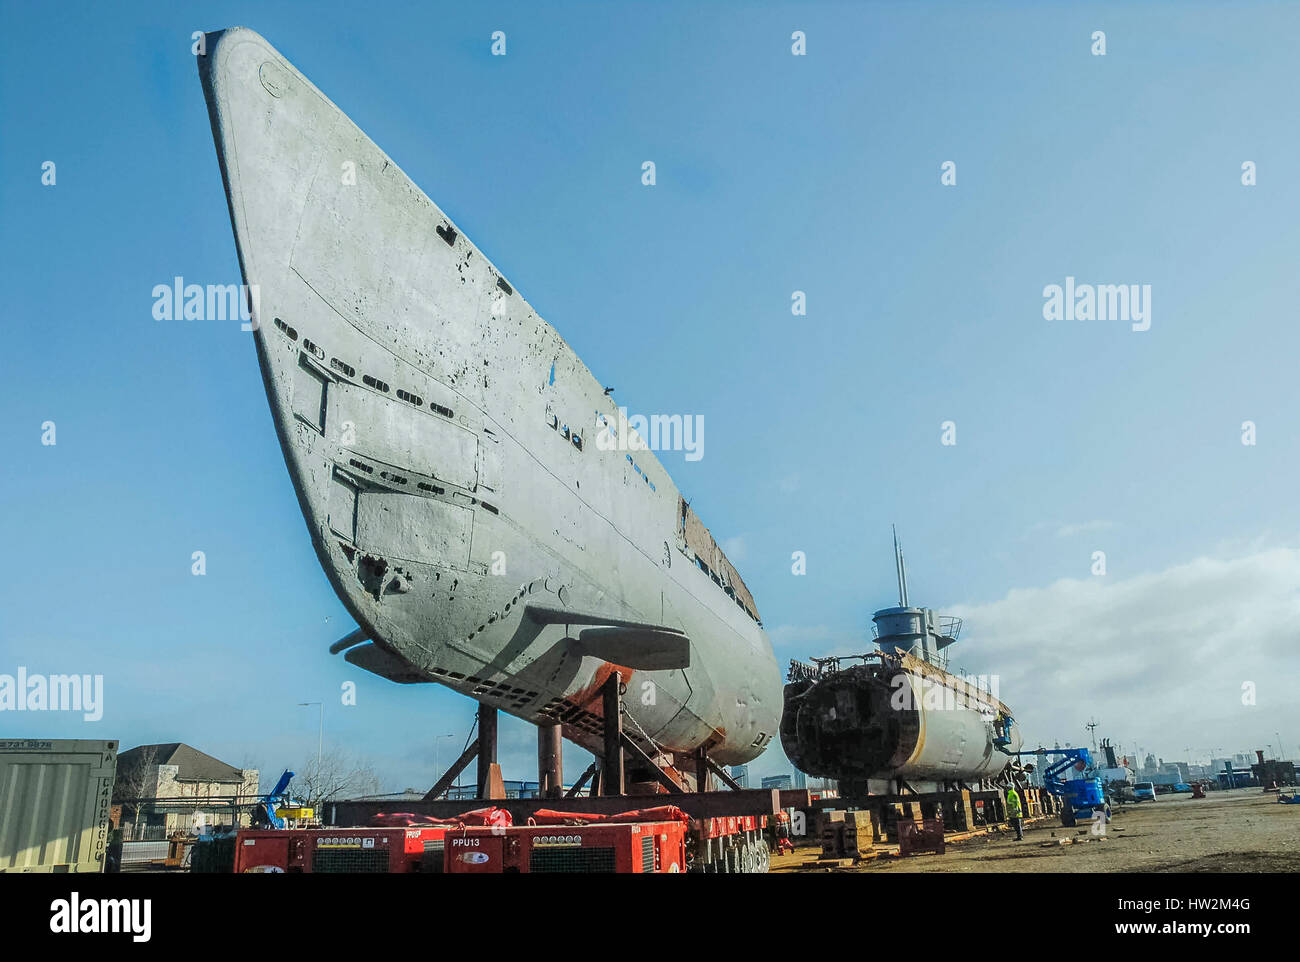 Merseytravel submarine U 534 gets cut into pieces at Birkenhead docks. It is now a static display at the Woodside ferry terminal in Birkenhead. Stock Photo